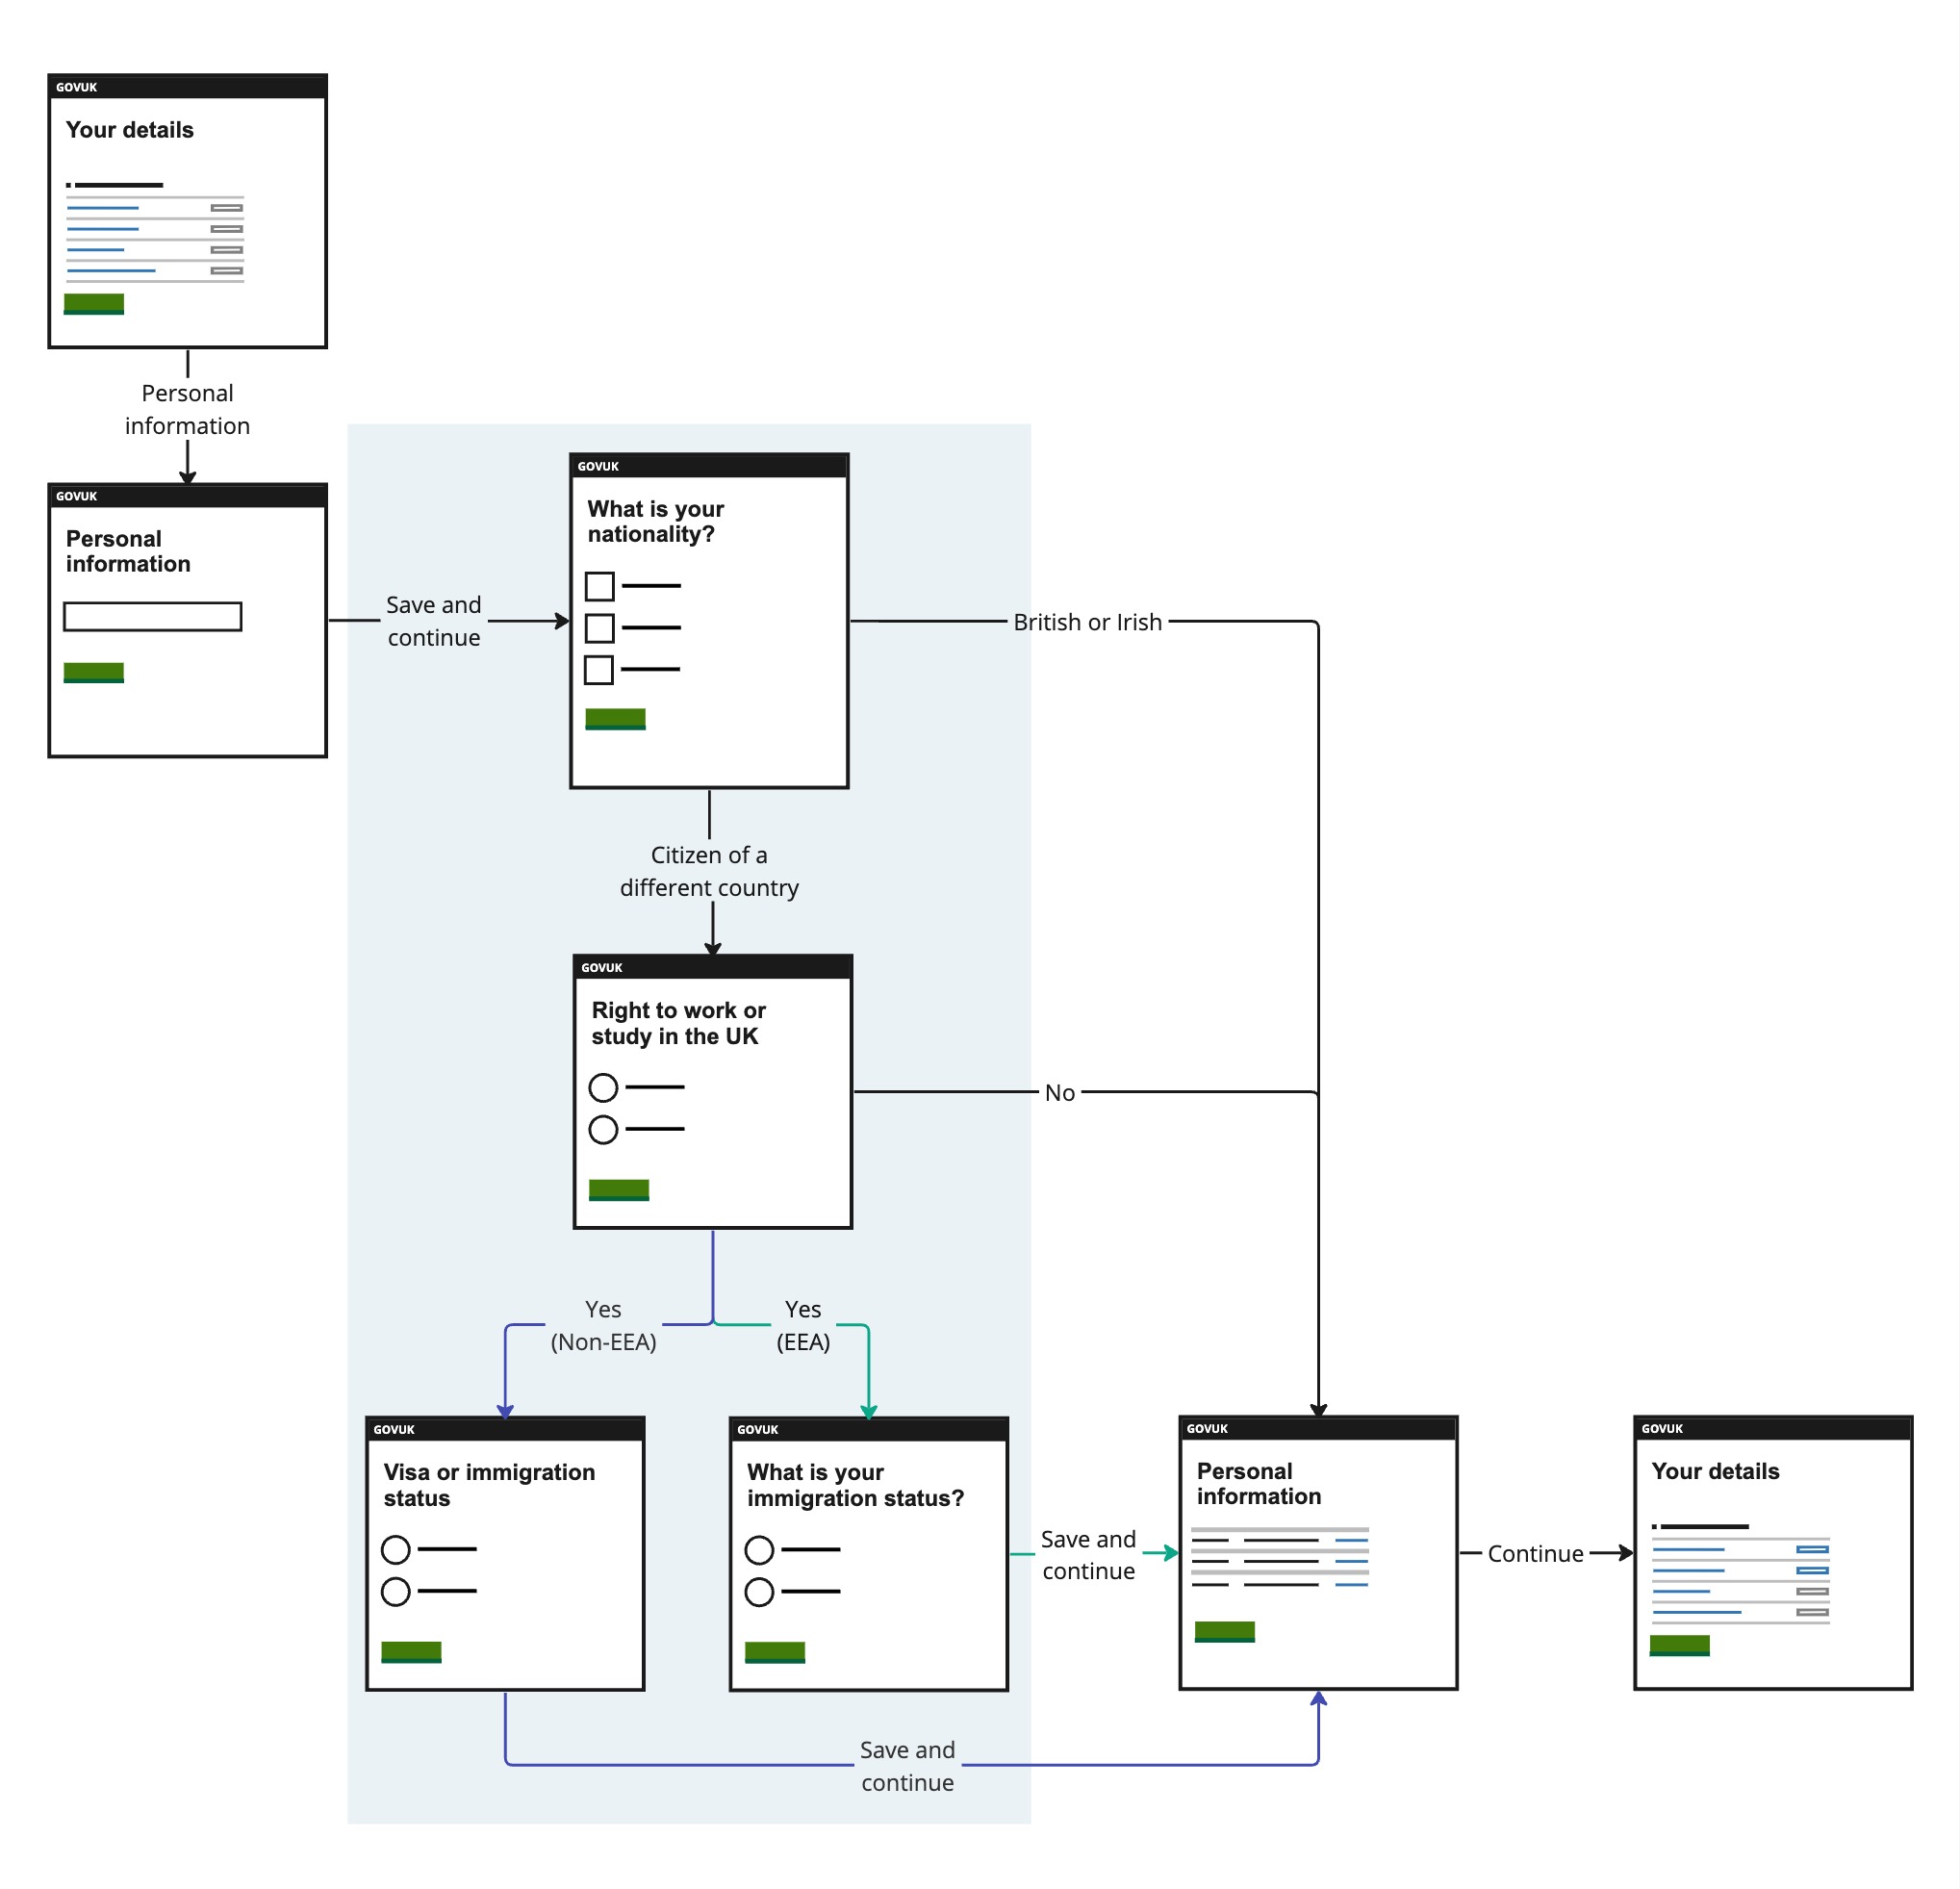 Image of a user flow showing the personal information section journey